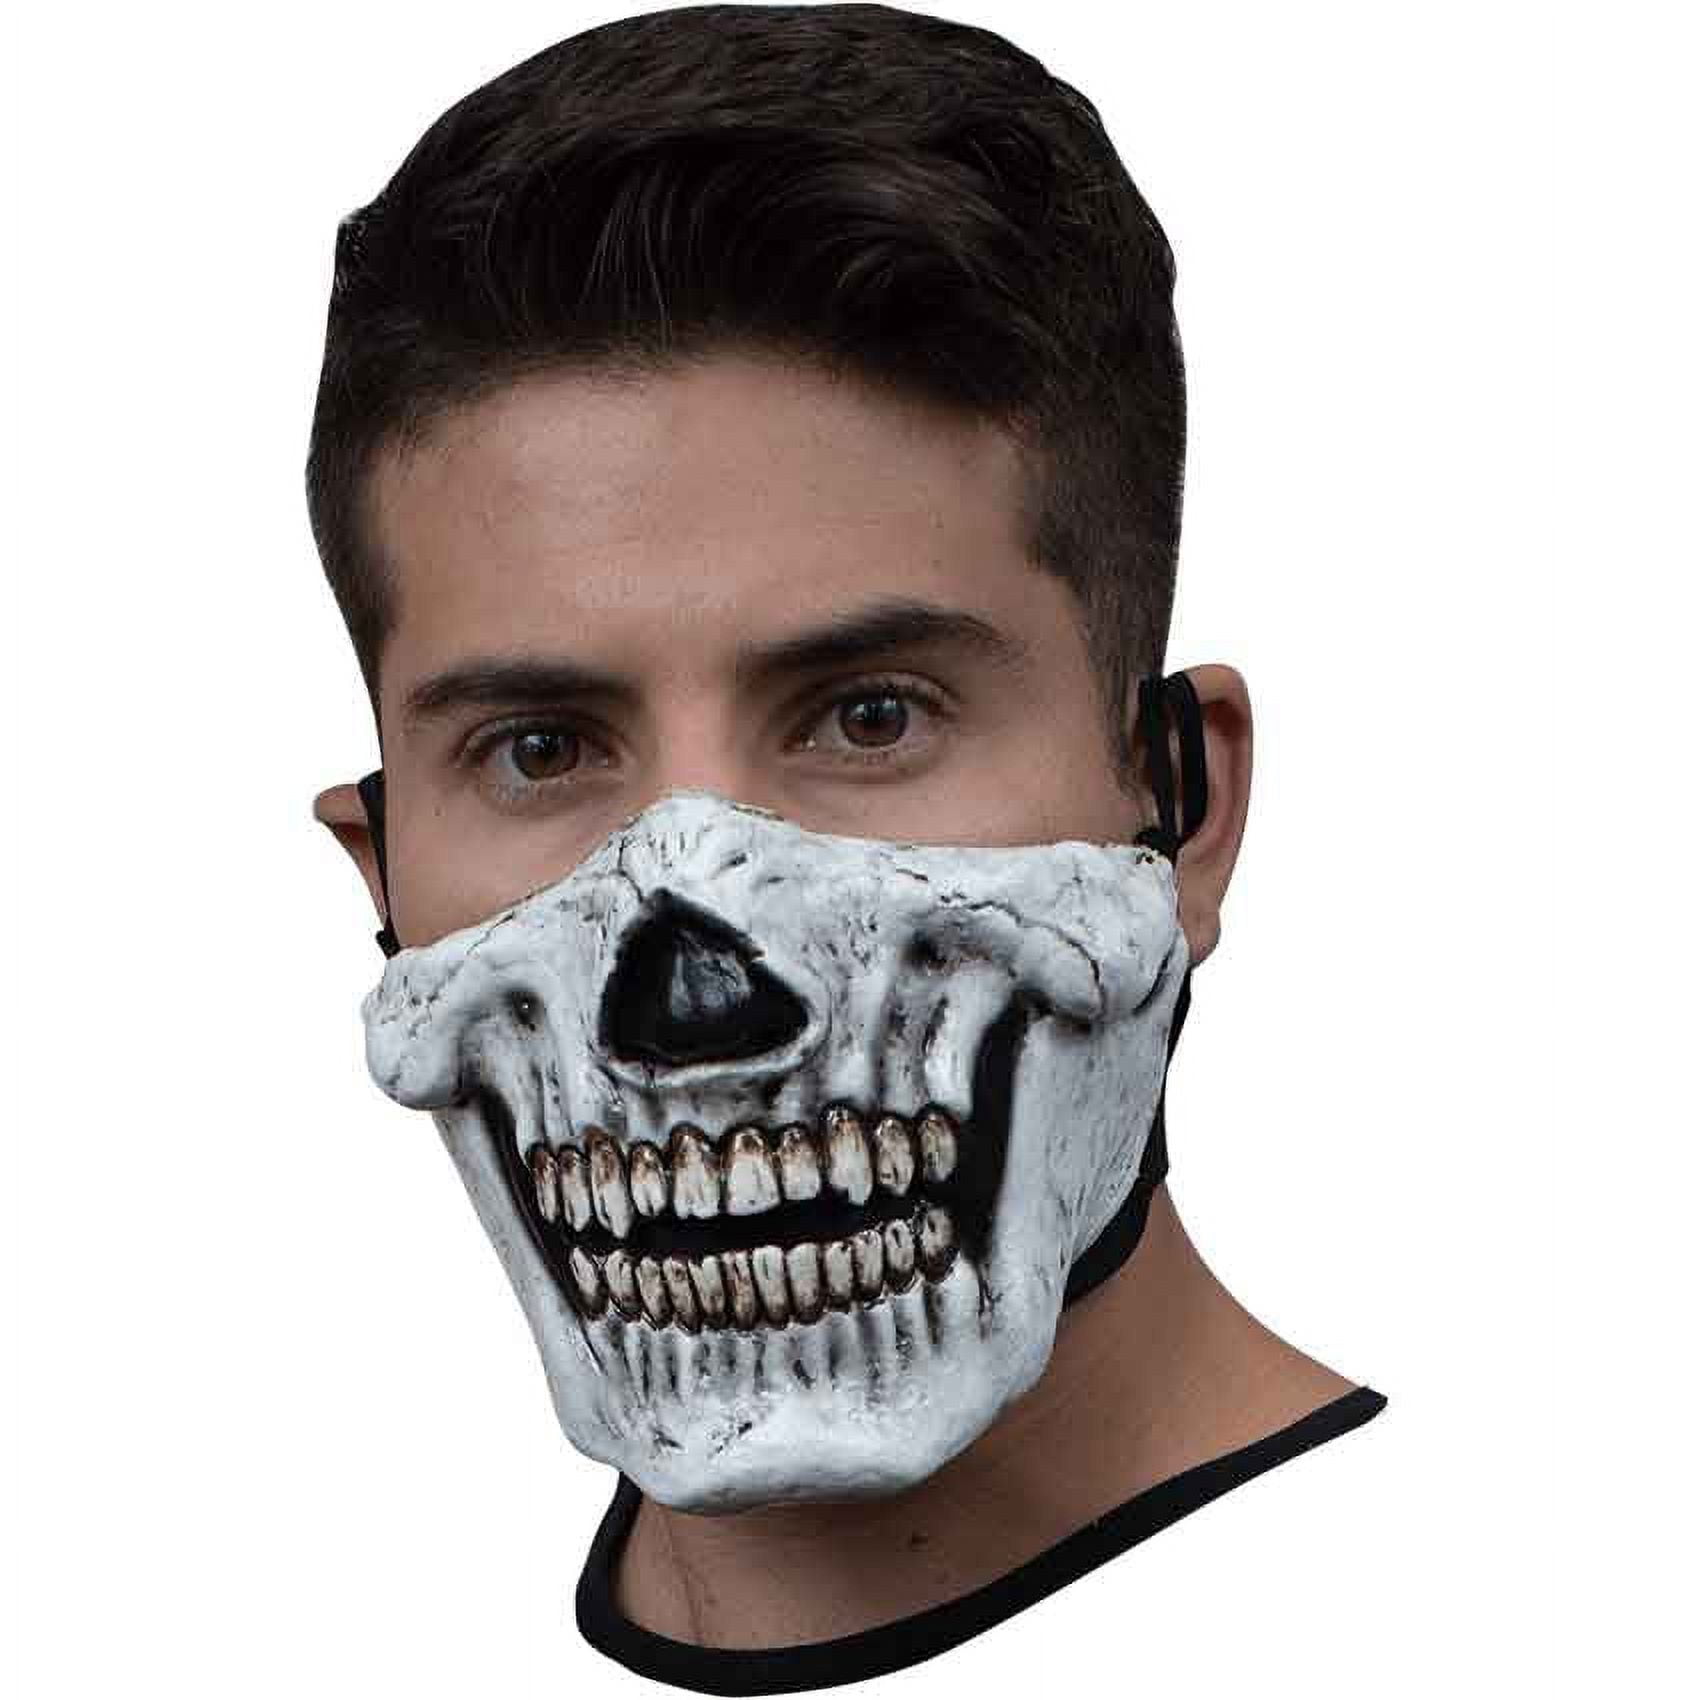 Skull Muzzle Costume Mask by Medieval Collectibles 